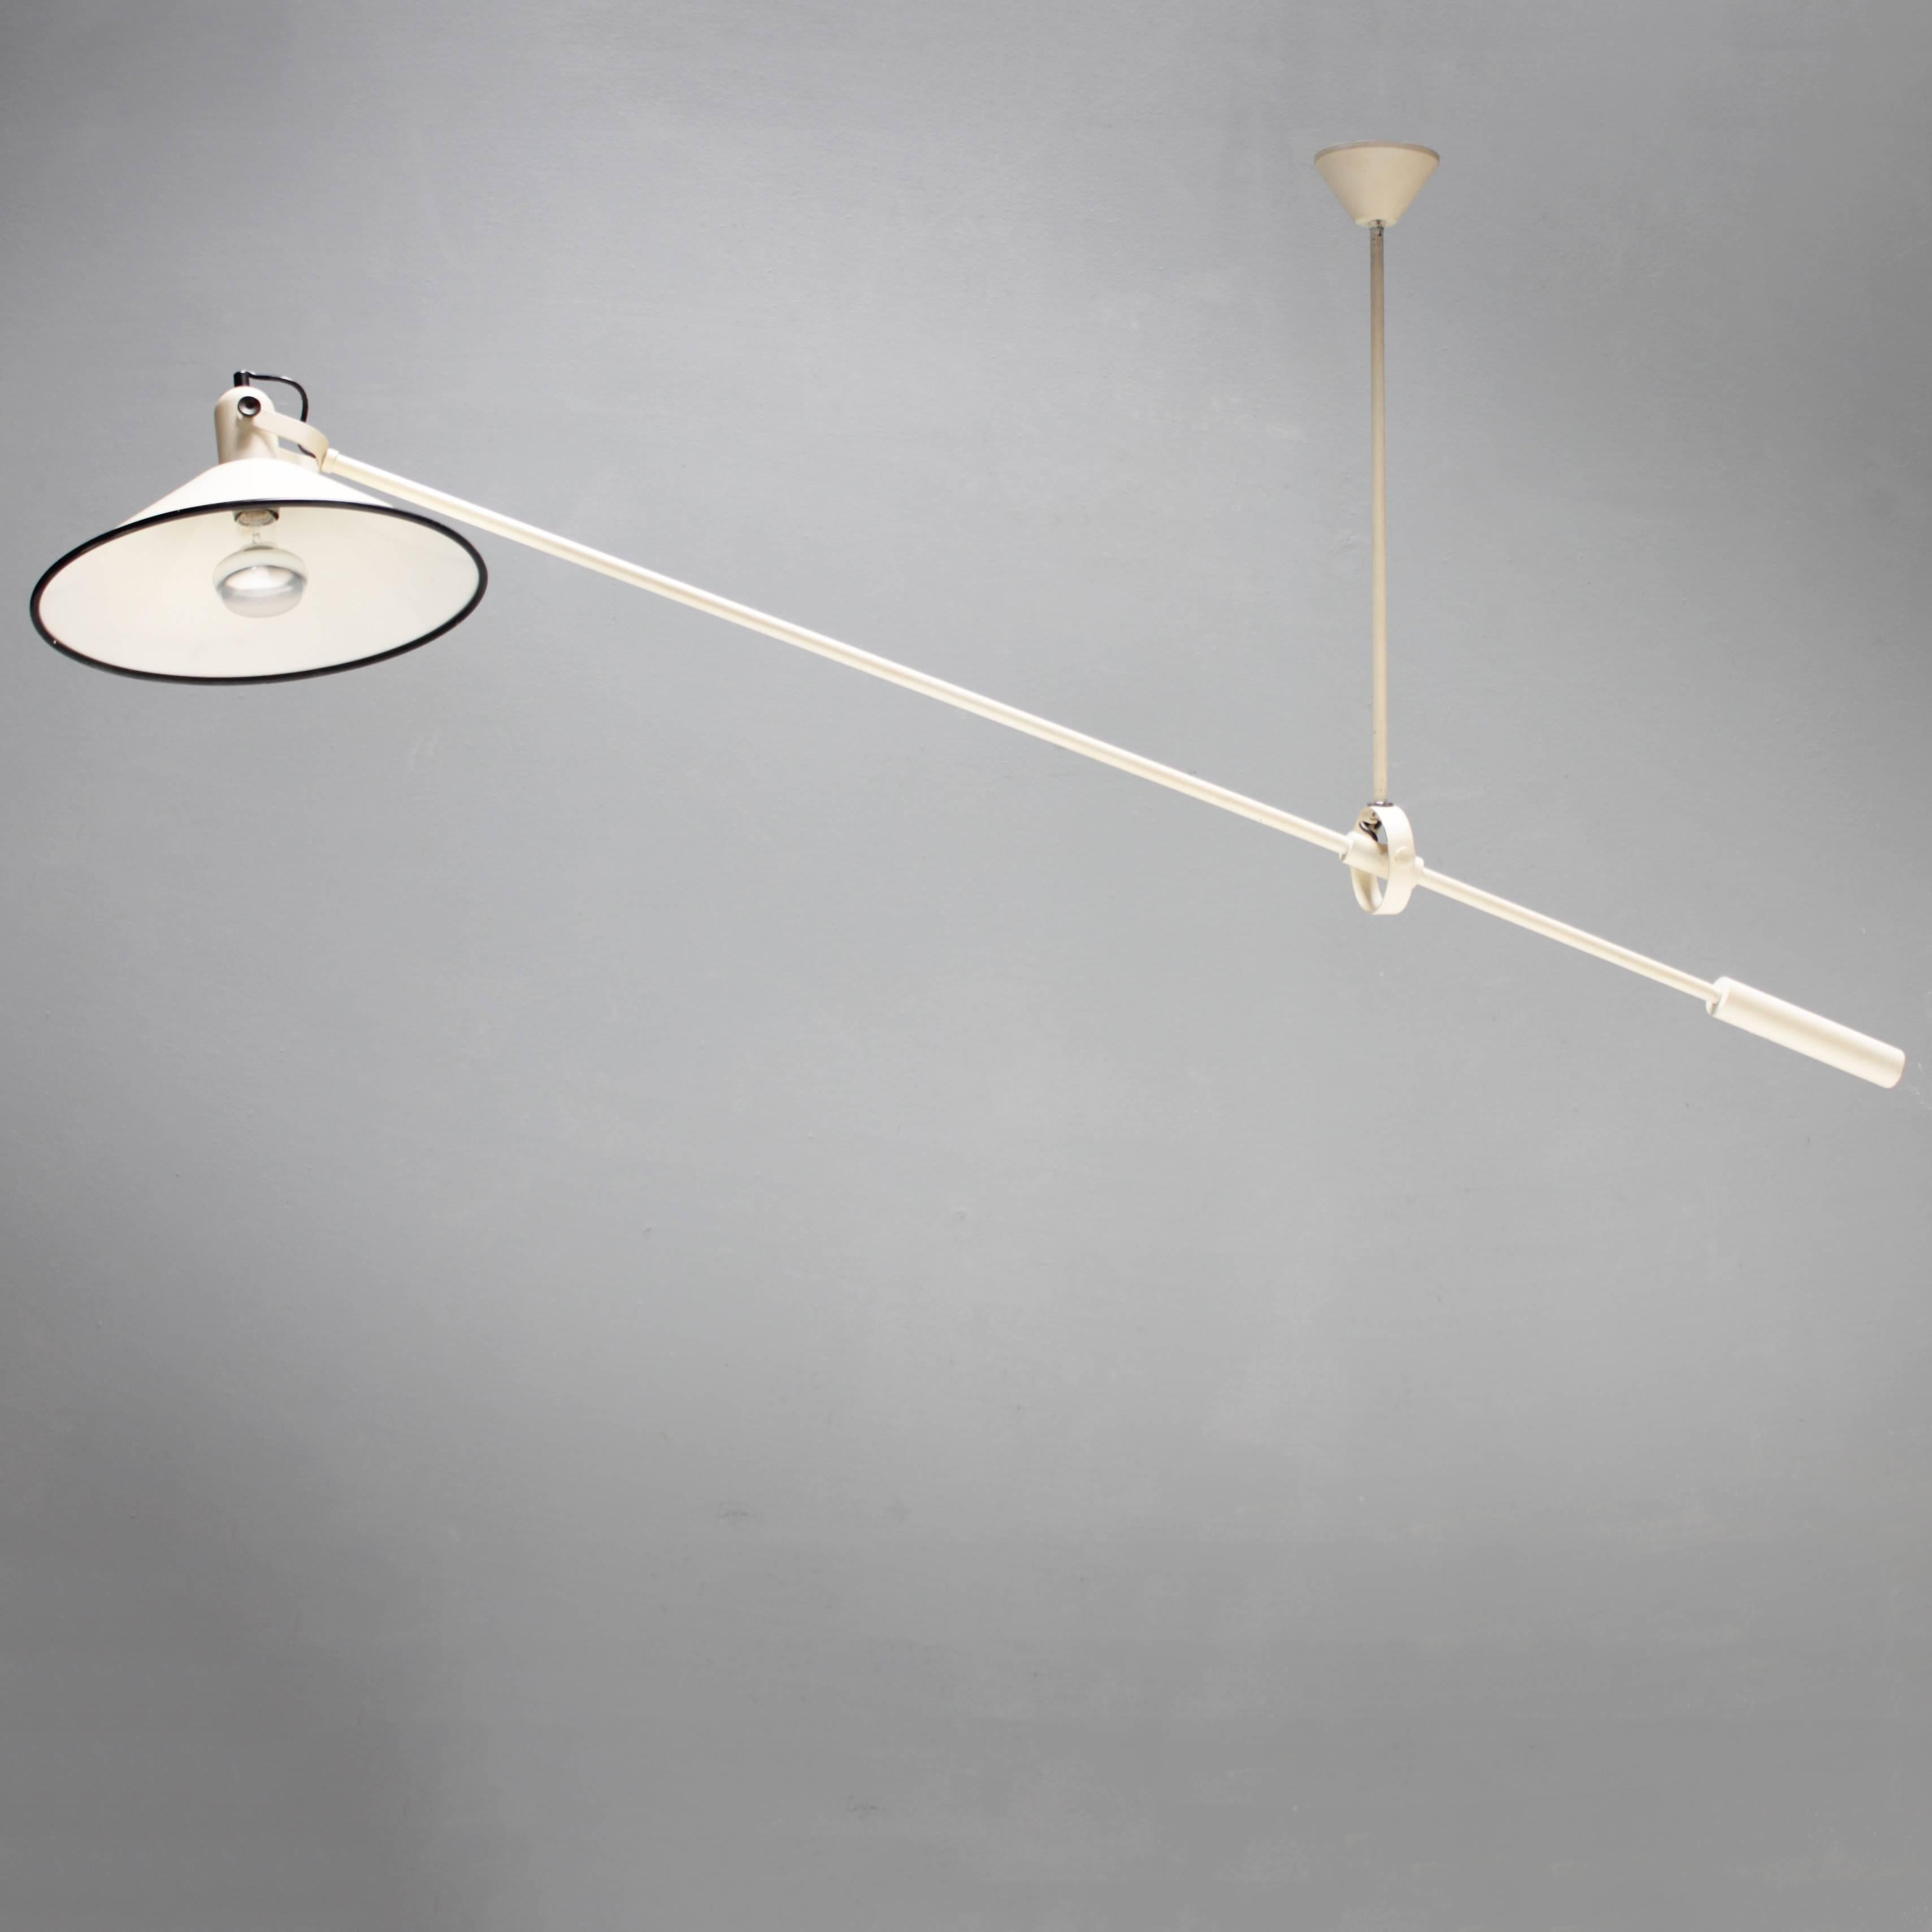 Anvia Counterbalance Ceiling Lamp by J.J.M. Hoogervorst, Dutch 1950’s.

Anvia was founded in the 1930’s by German emigres. By employing J.J.M (Jan) Hoogervorst the company became a mayor player in the Dutch lighting industry in the 1950’s and